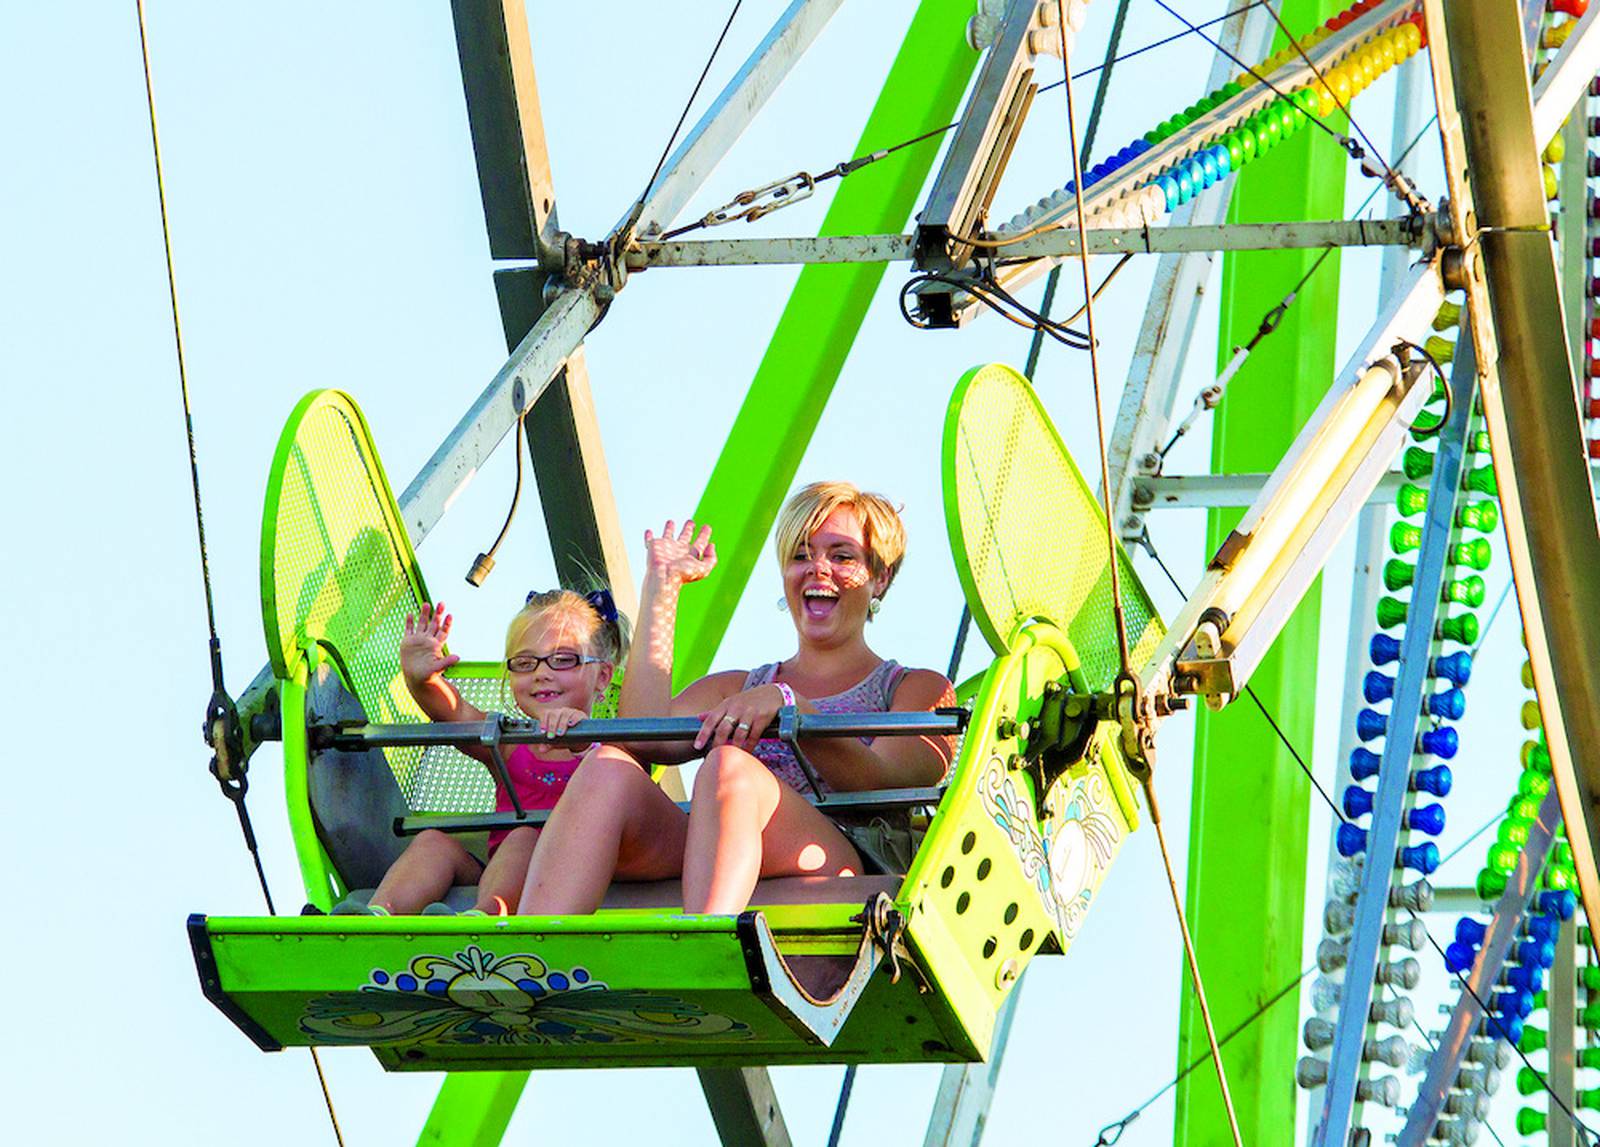 Fair games, carnival roll on in Ogle County Shaw Local